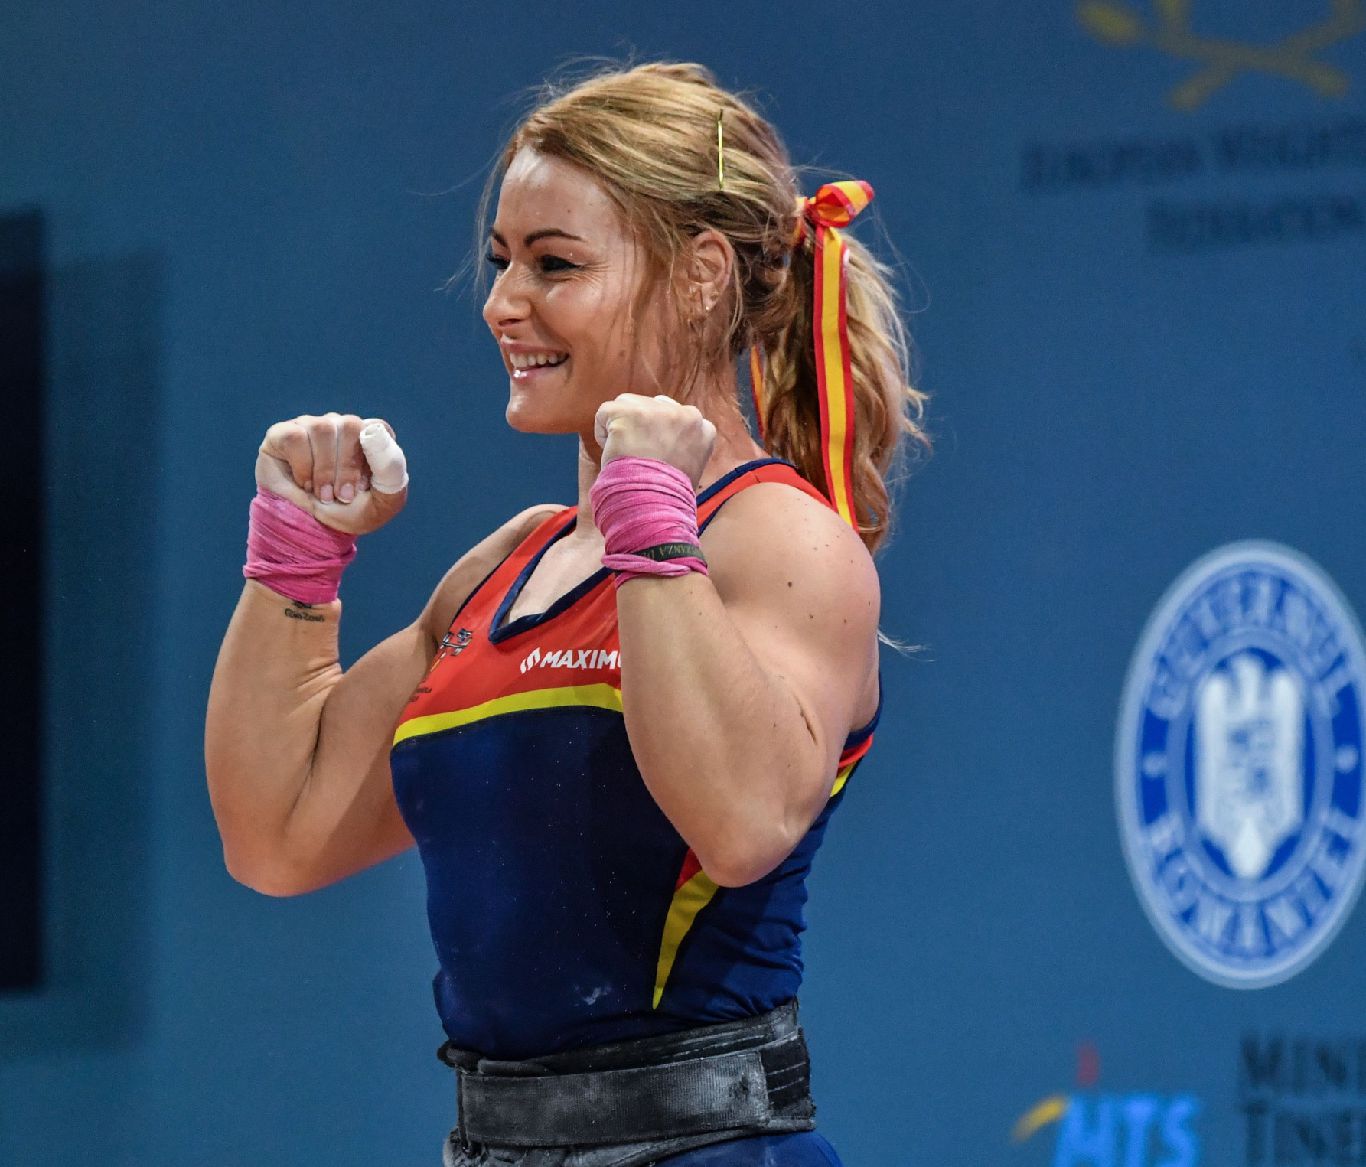 Weightlifter Lydia Valentin's First Lift At 87KG Could Be...